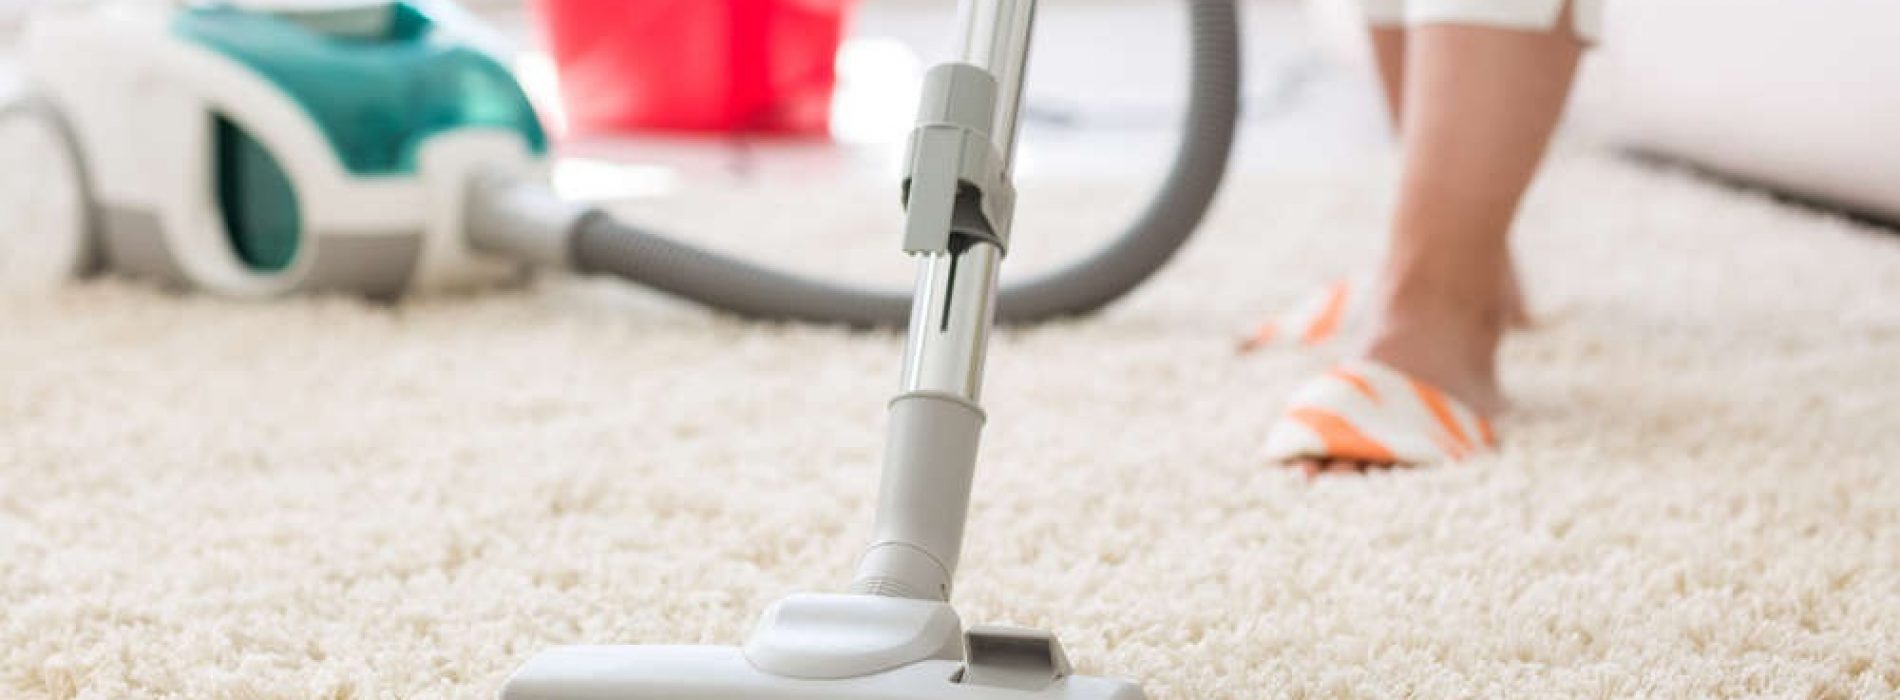 Reliable Services to Clean Carpet and Remove Molds